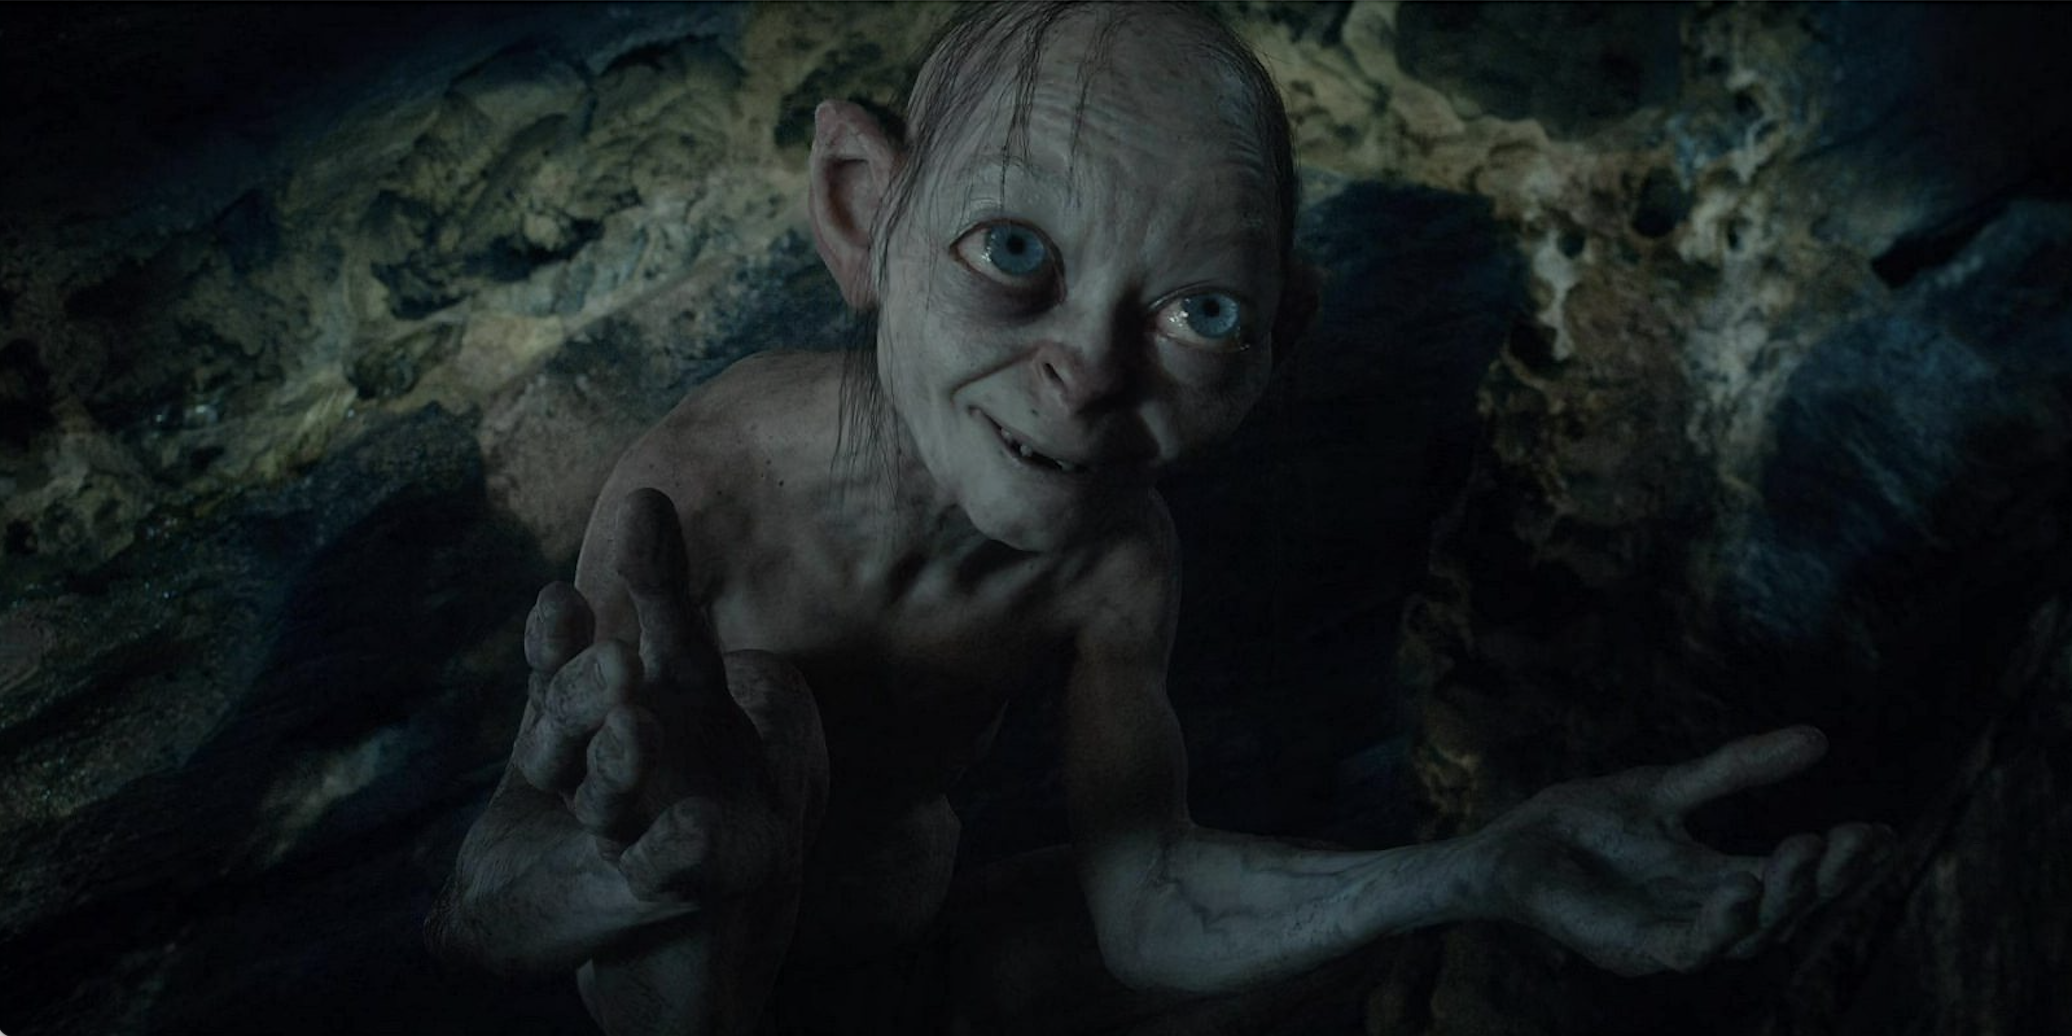 Gollum with hands outstretched from The Hobbit